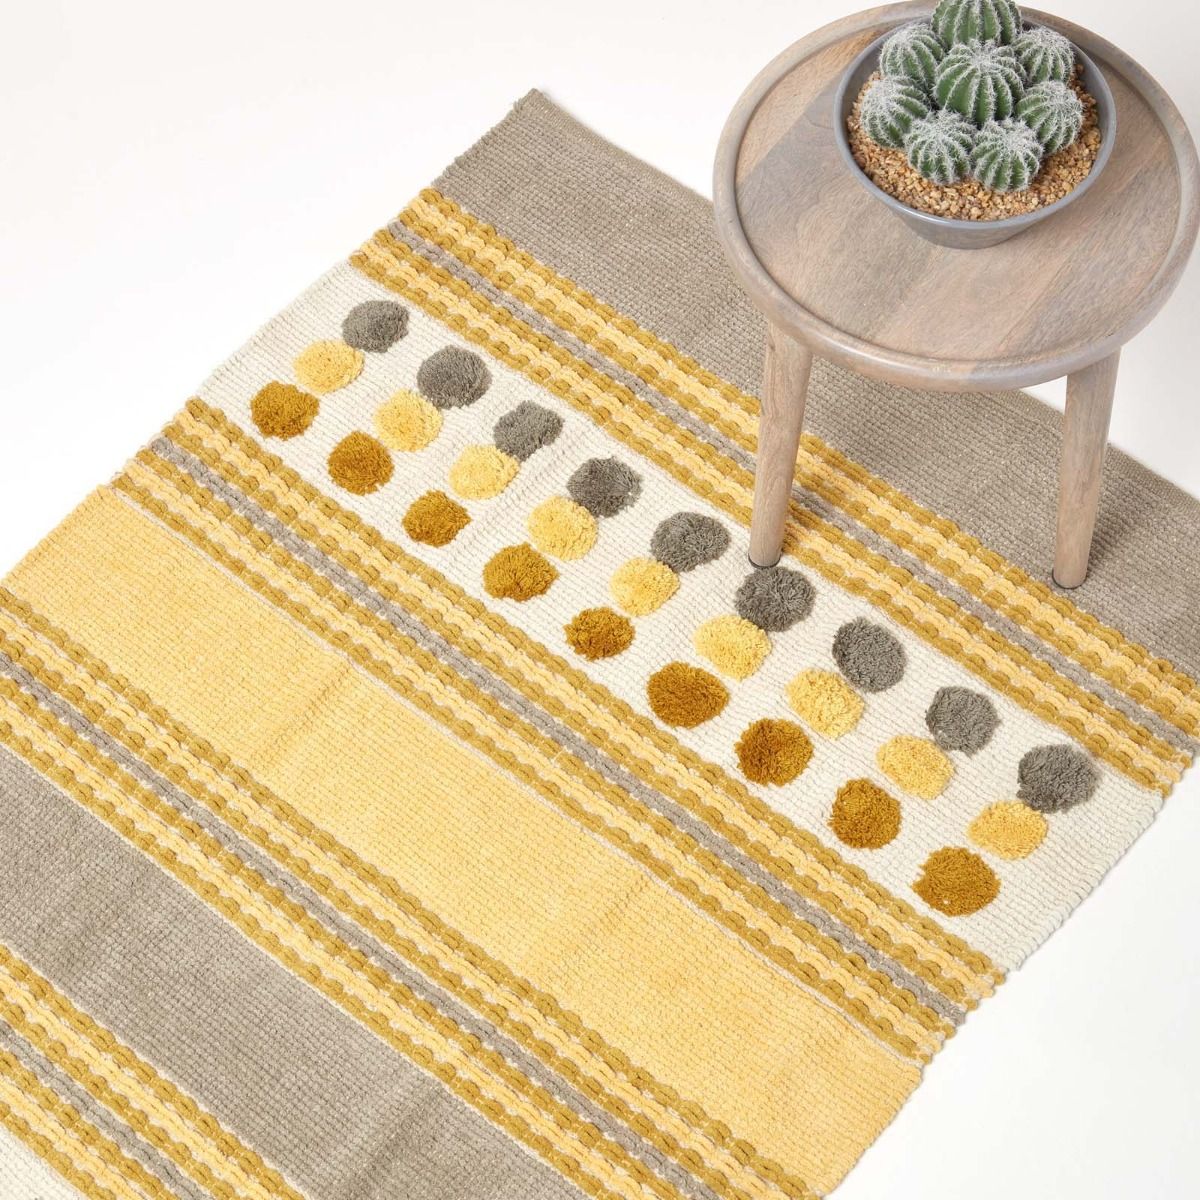 HOMESCAPES Grey Ochre Yellow Modern Cotton Chenille Hall Runner 66 x 200cm Tufted Circles & Hand Woven Striped Hallway Rug 